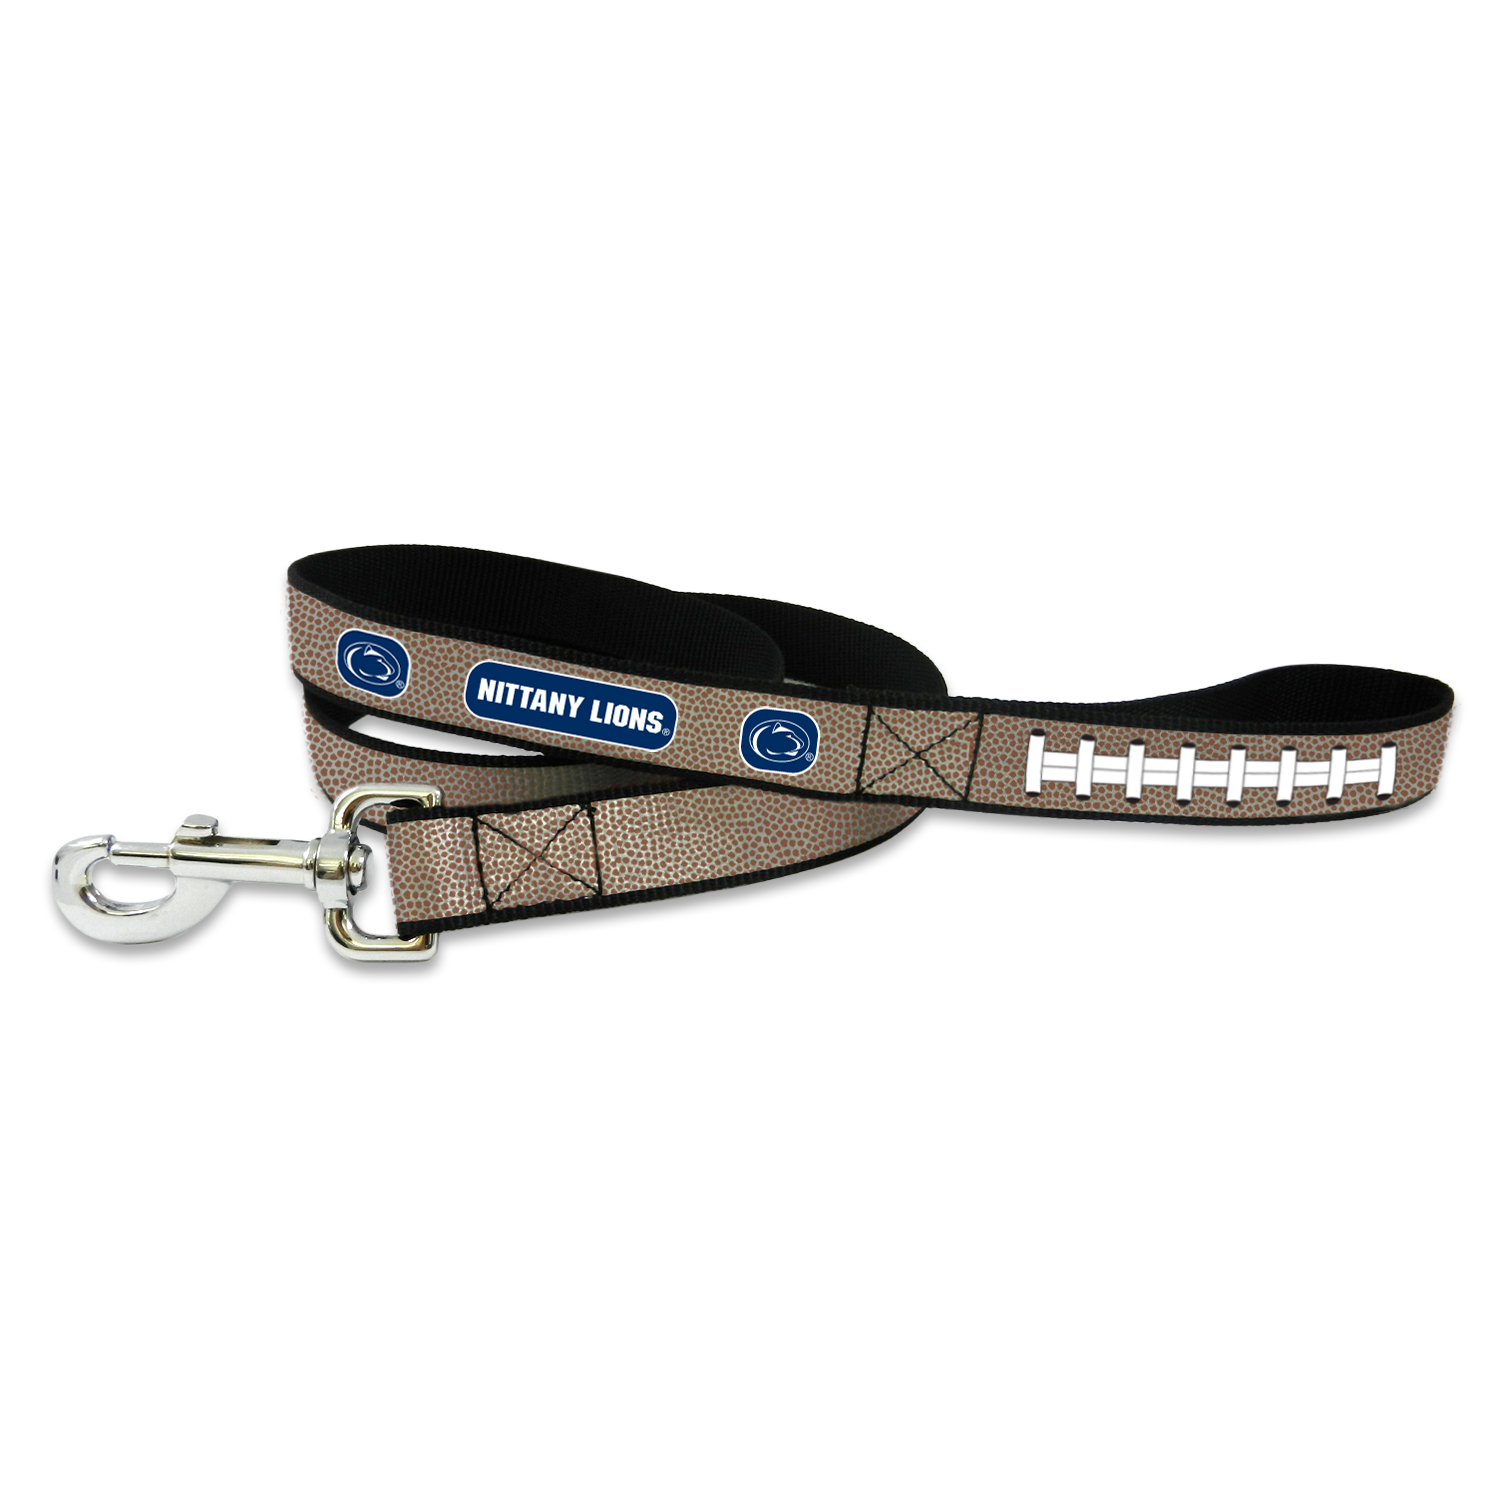 GAMEWEAR Penn State Nittany Lions Reflective Football Leash